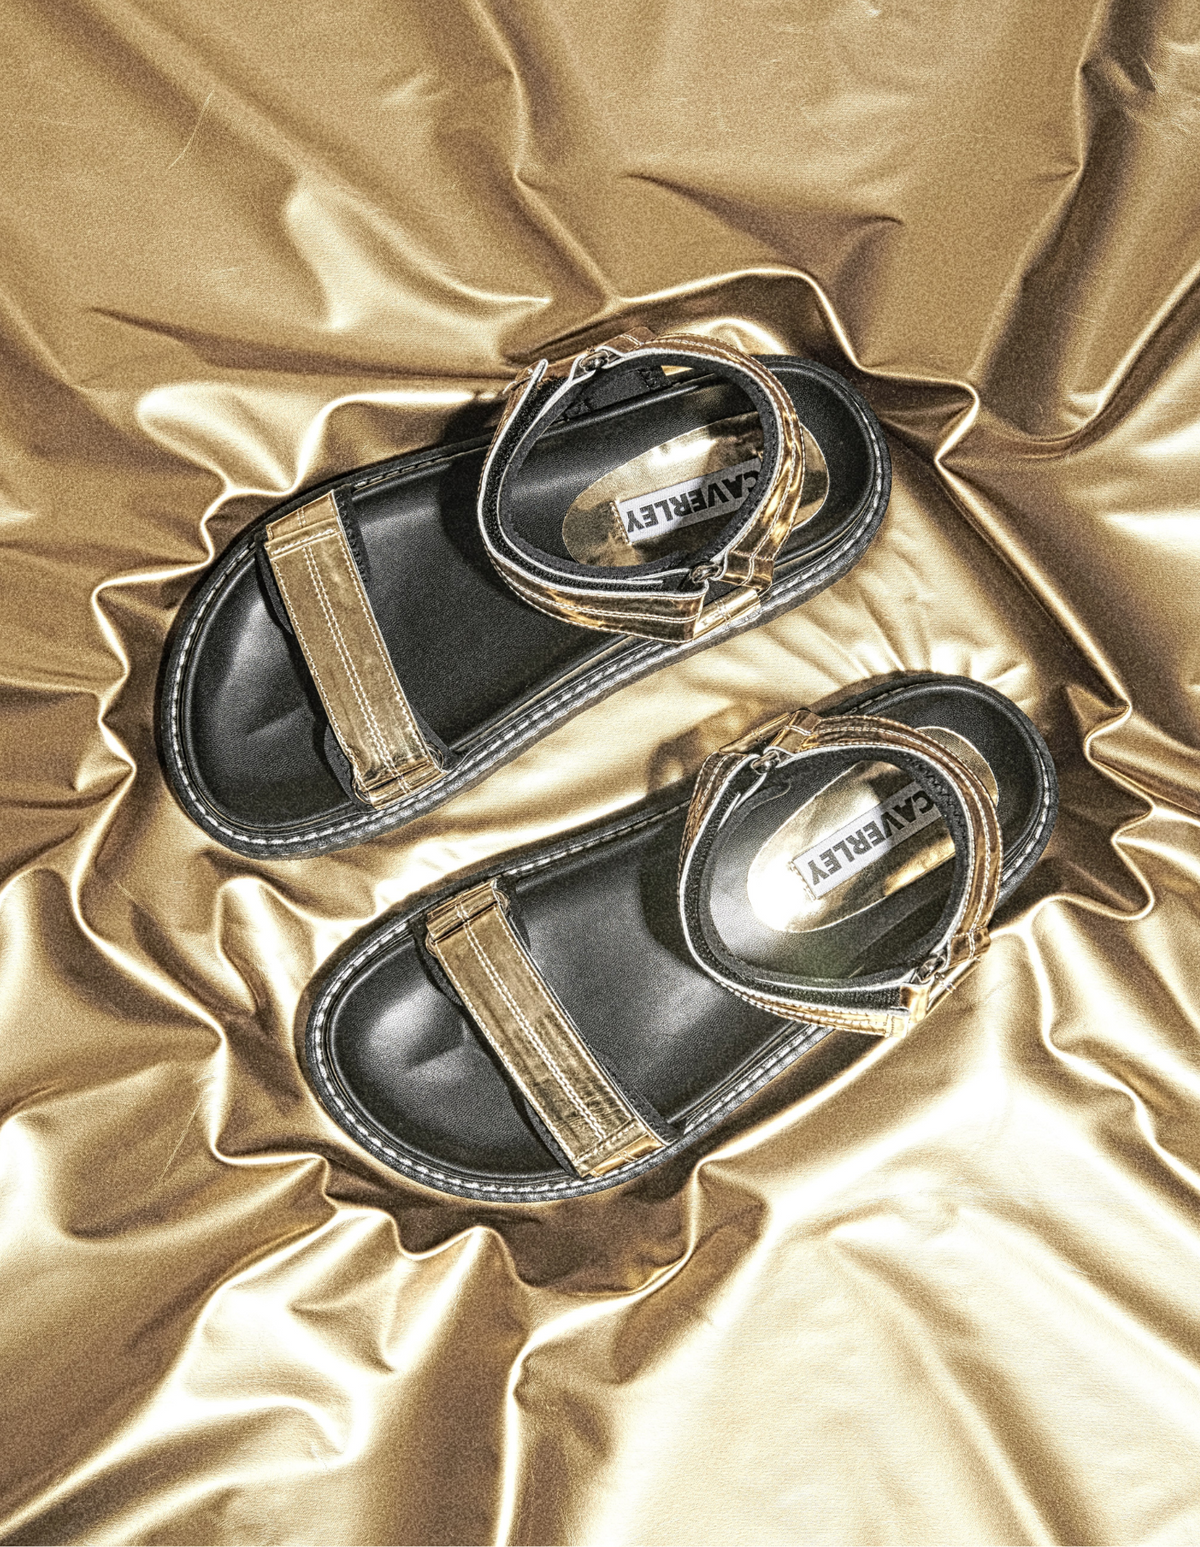 Parallel Culture Shoes and Fashion Online SANDALS CAVERLEY RONI II SANDAL GOLD